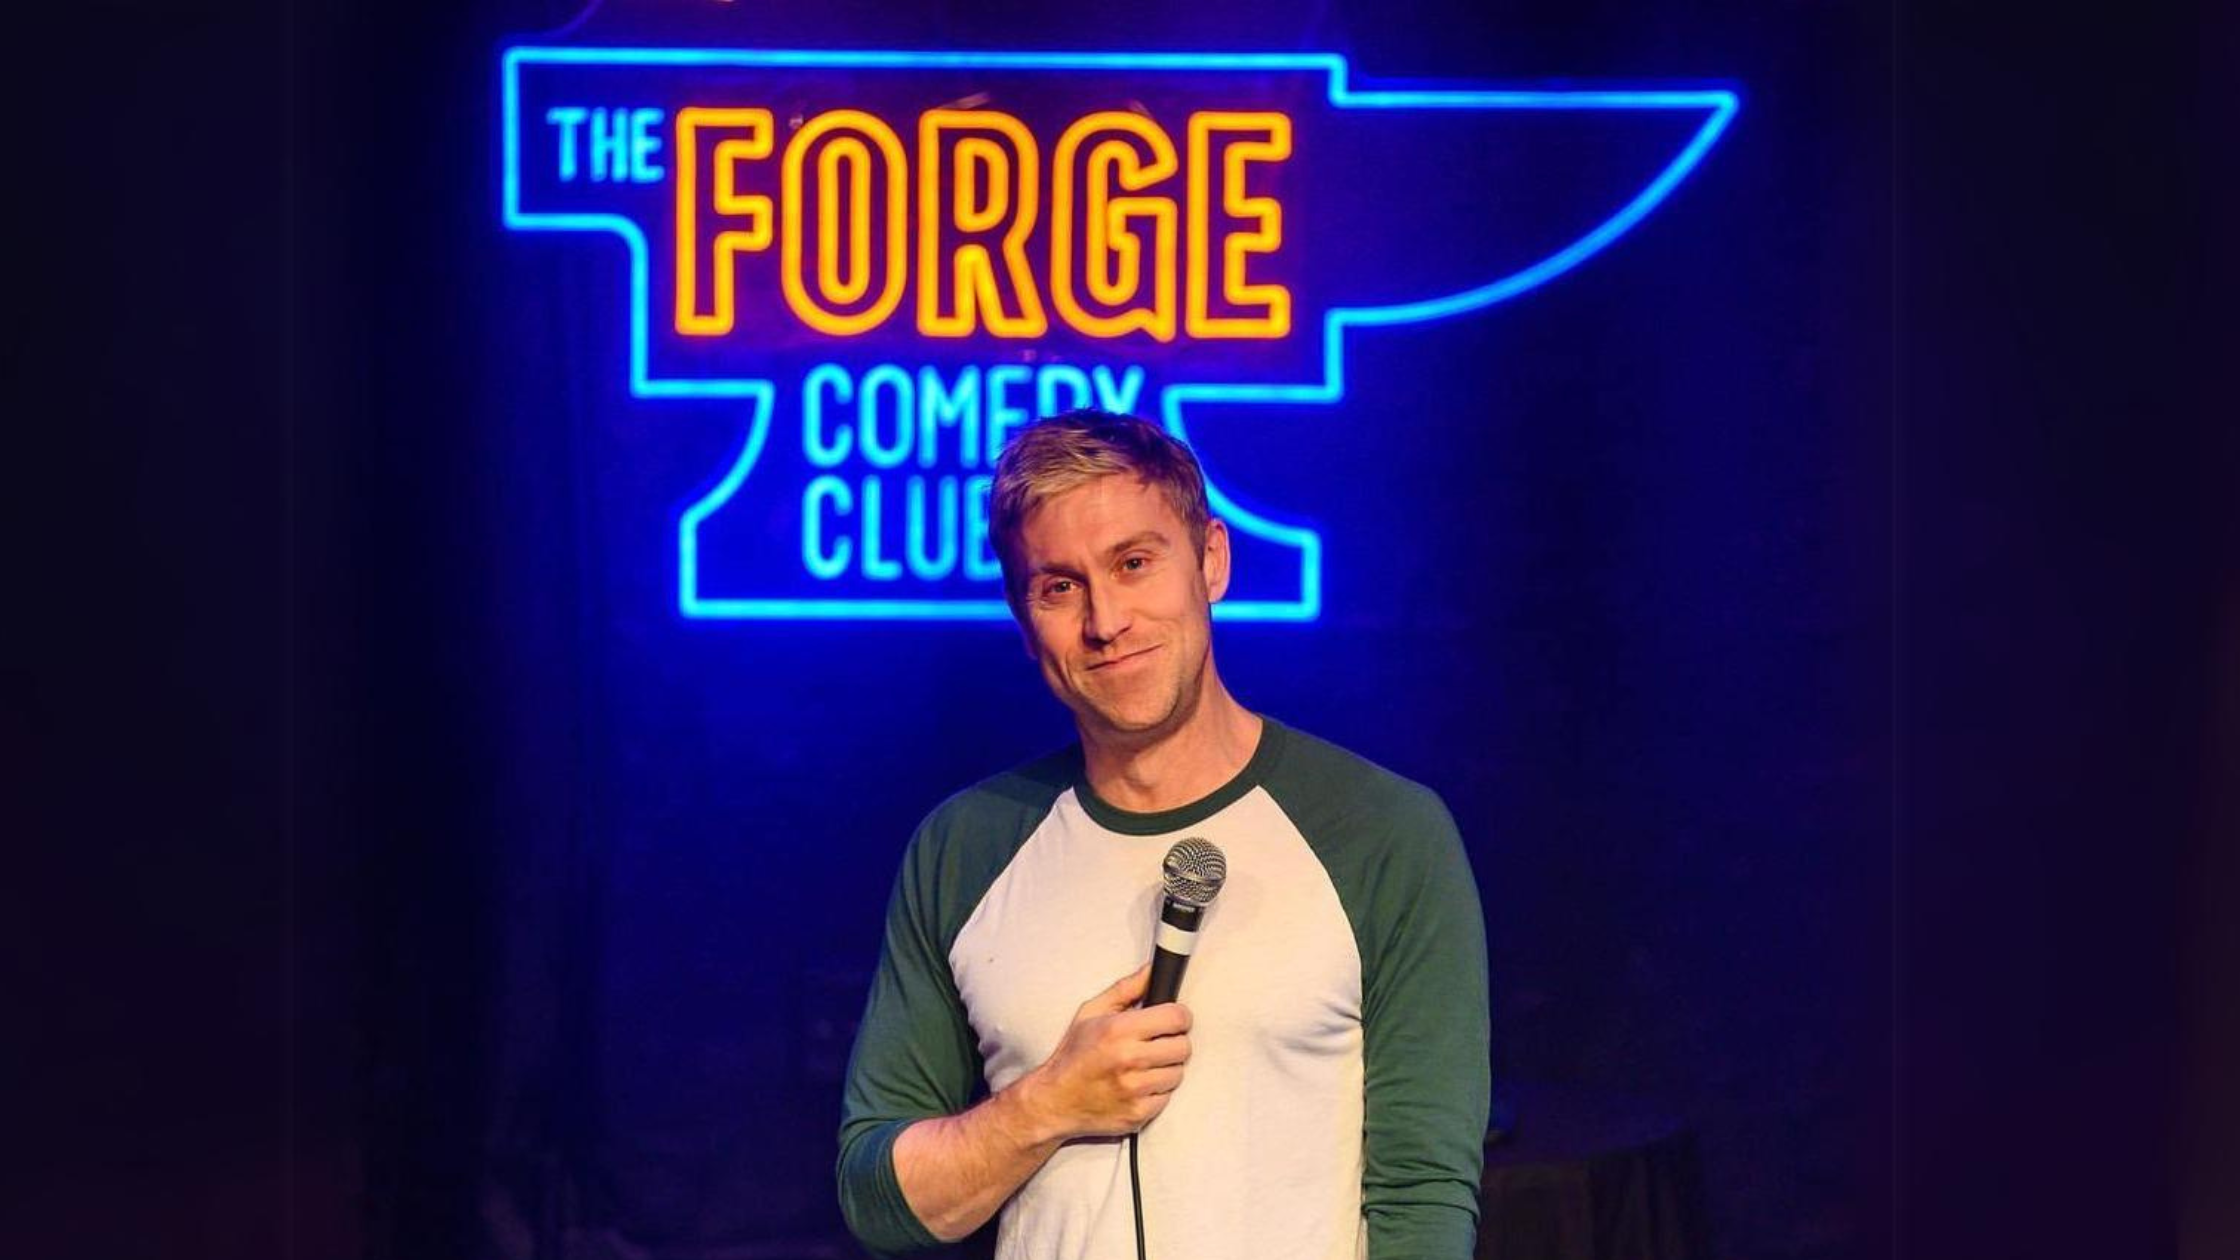 Russell Howards at The Forge Comedy Club Brighton.